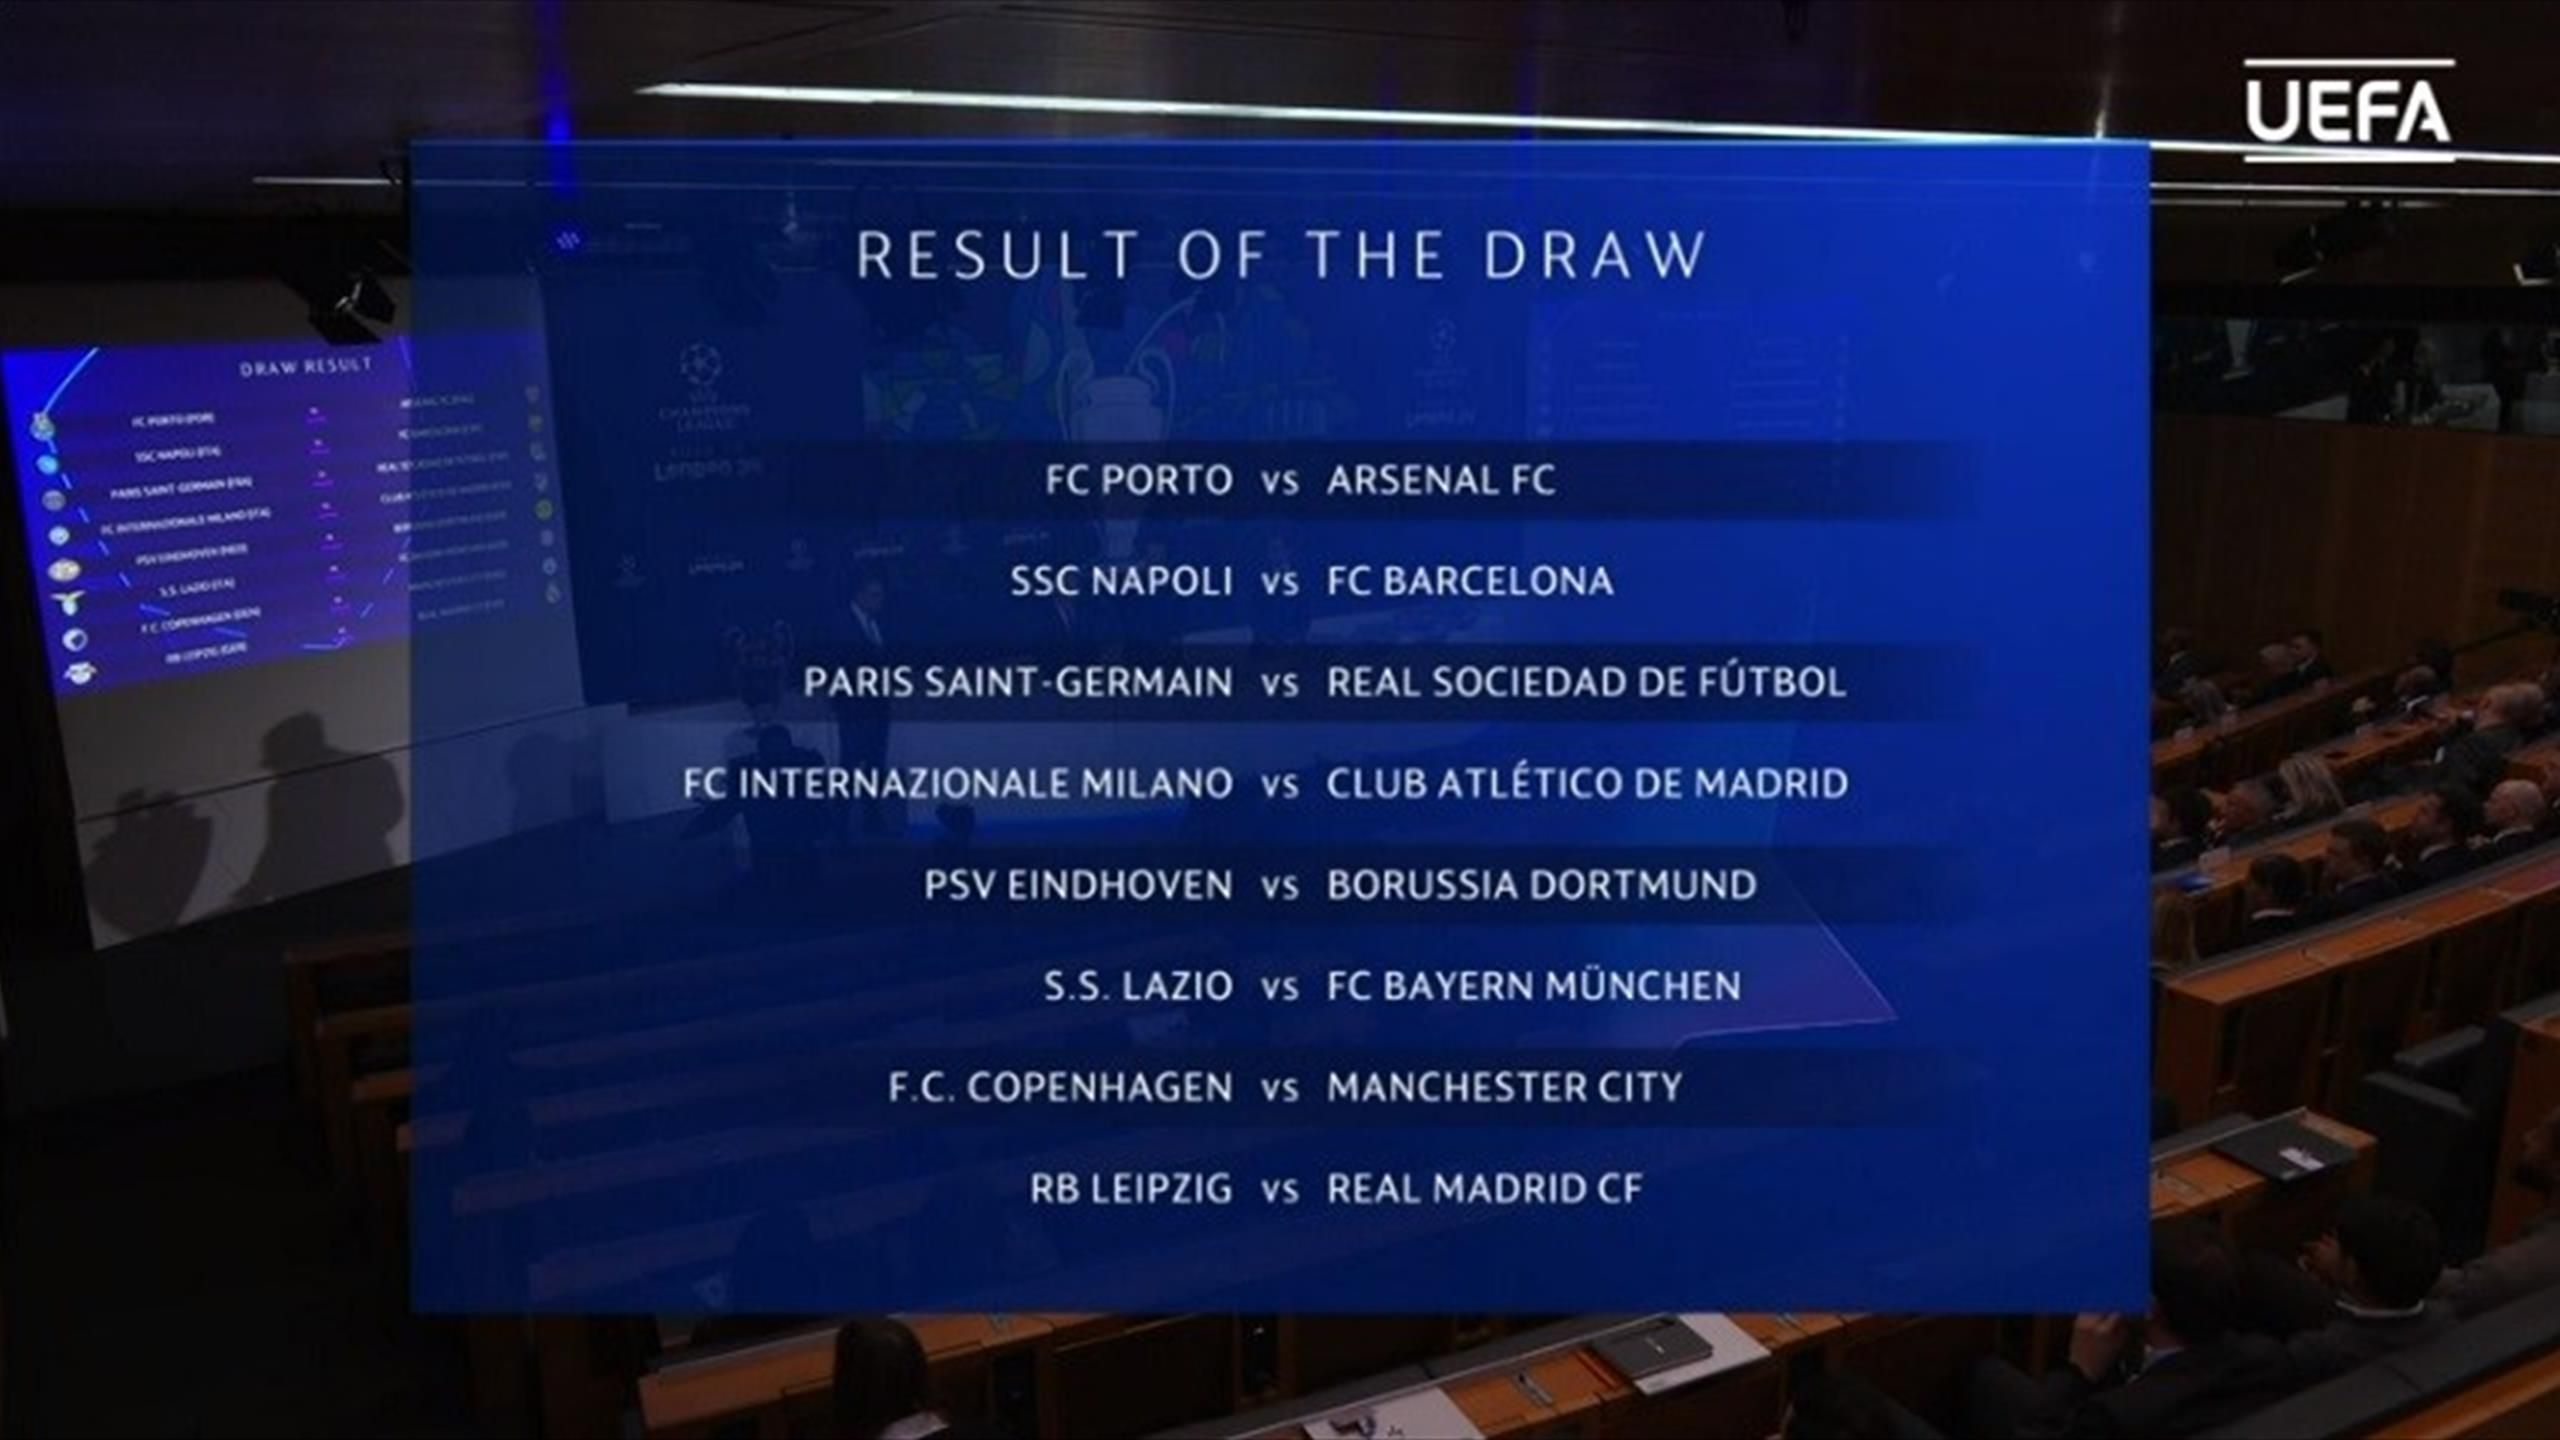 2019/20 UEFA Champions League Round of 16 Draw - YouTube